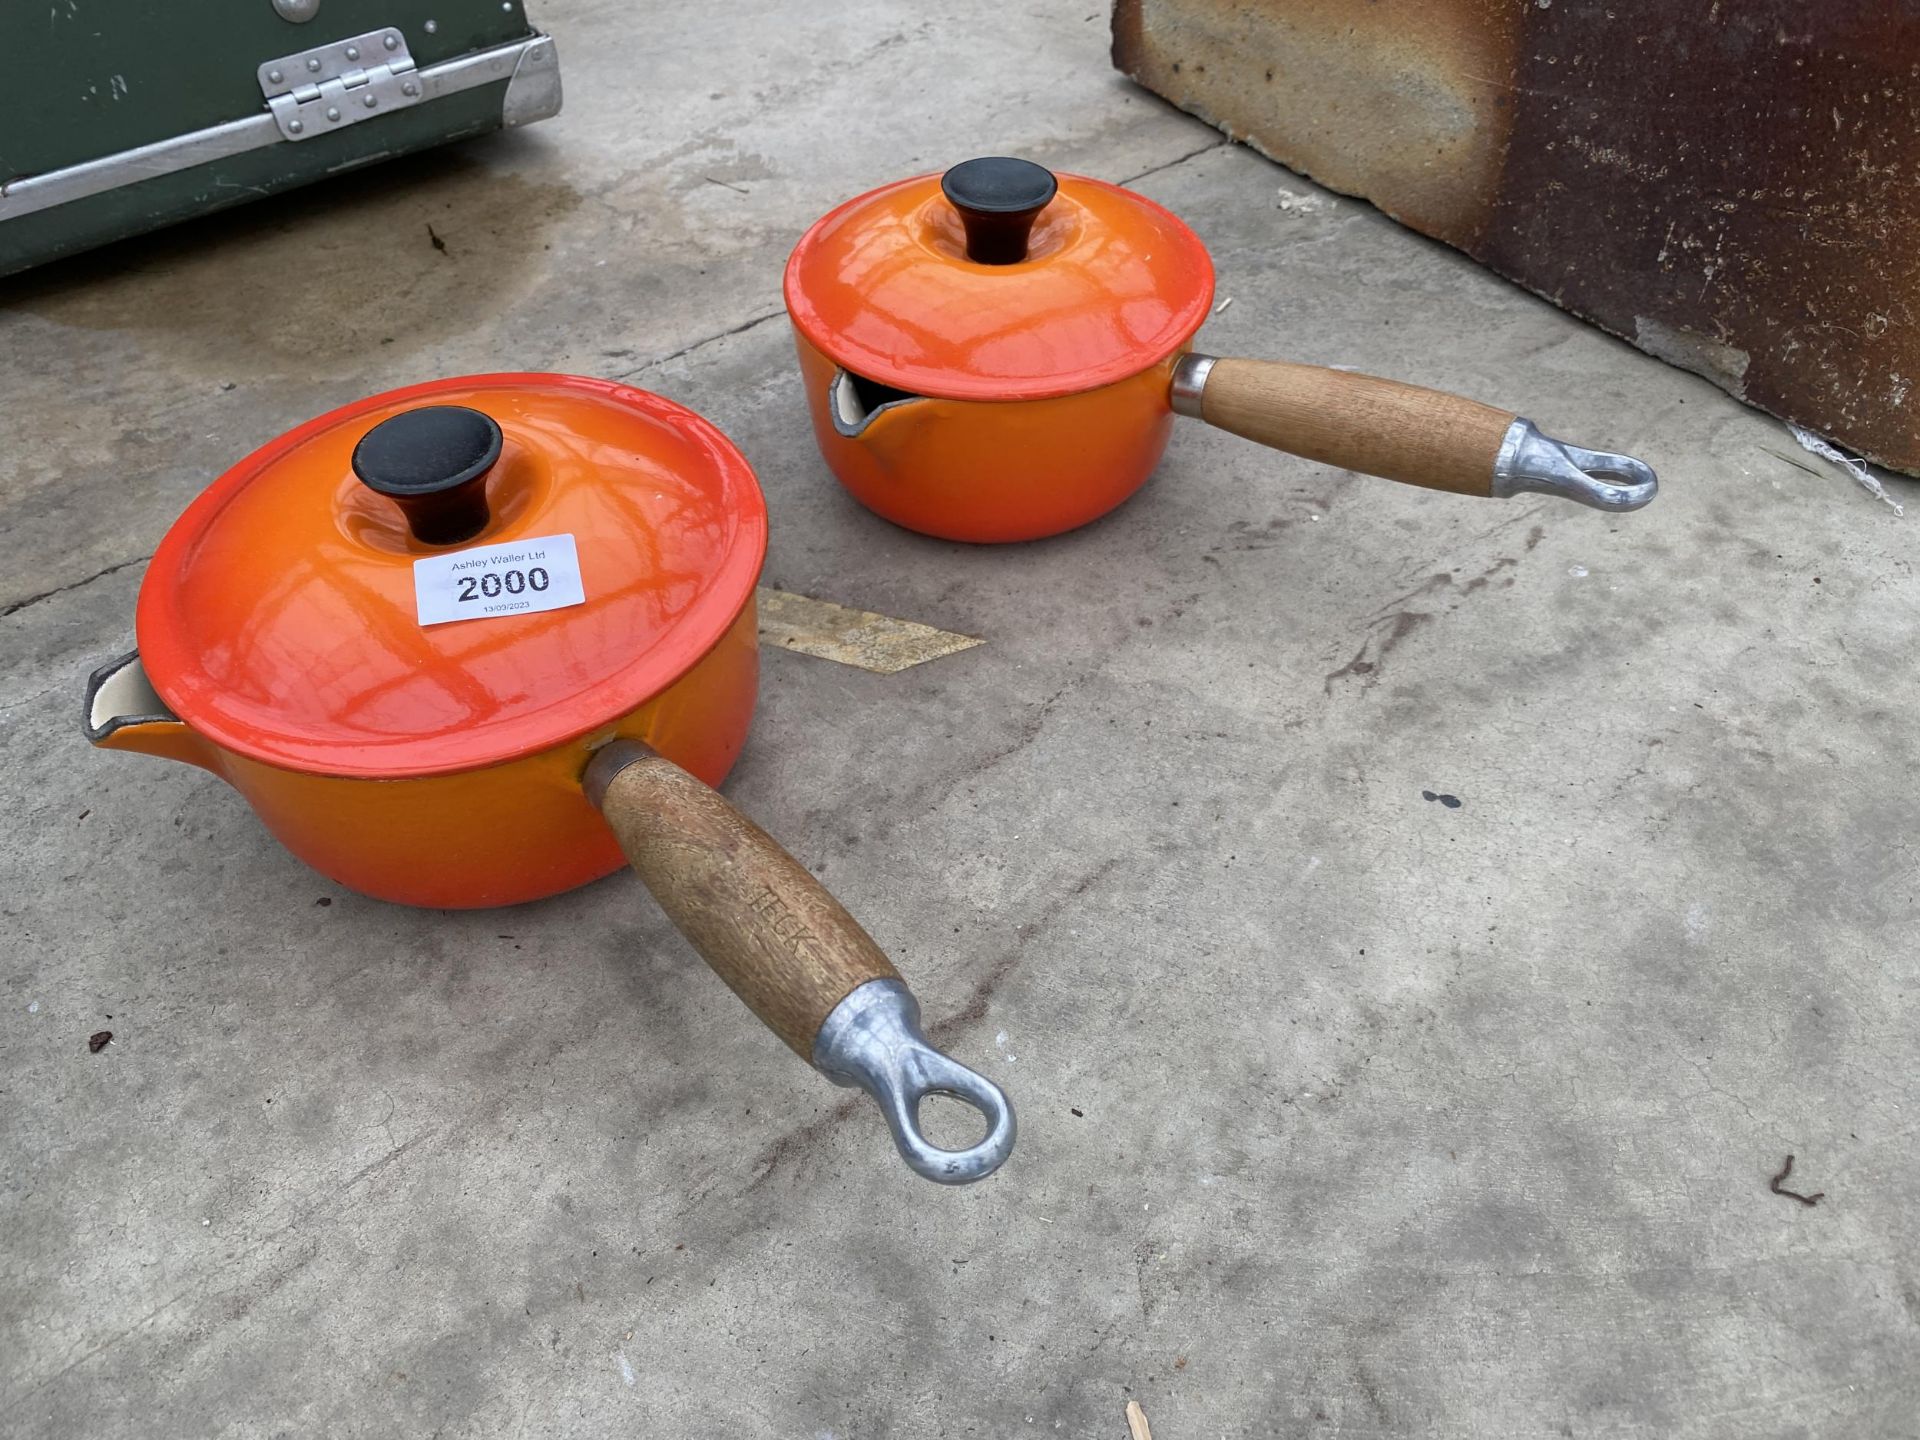 TWO ORANGE LE CREUSET PANS WITH WOODEN HANDLES AND LIDS